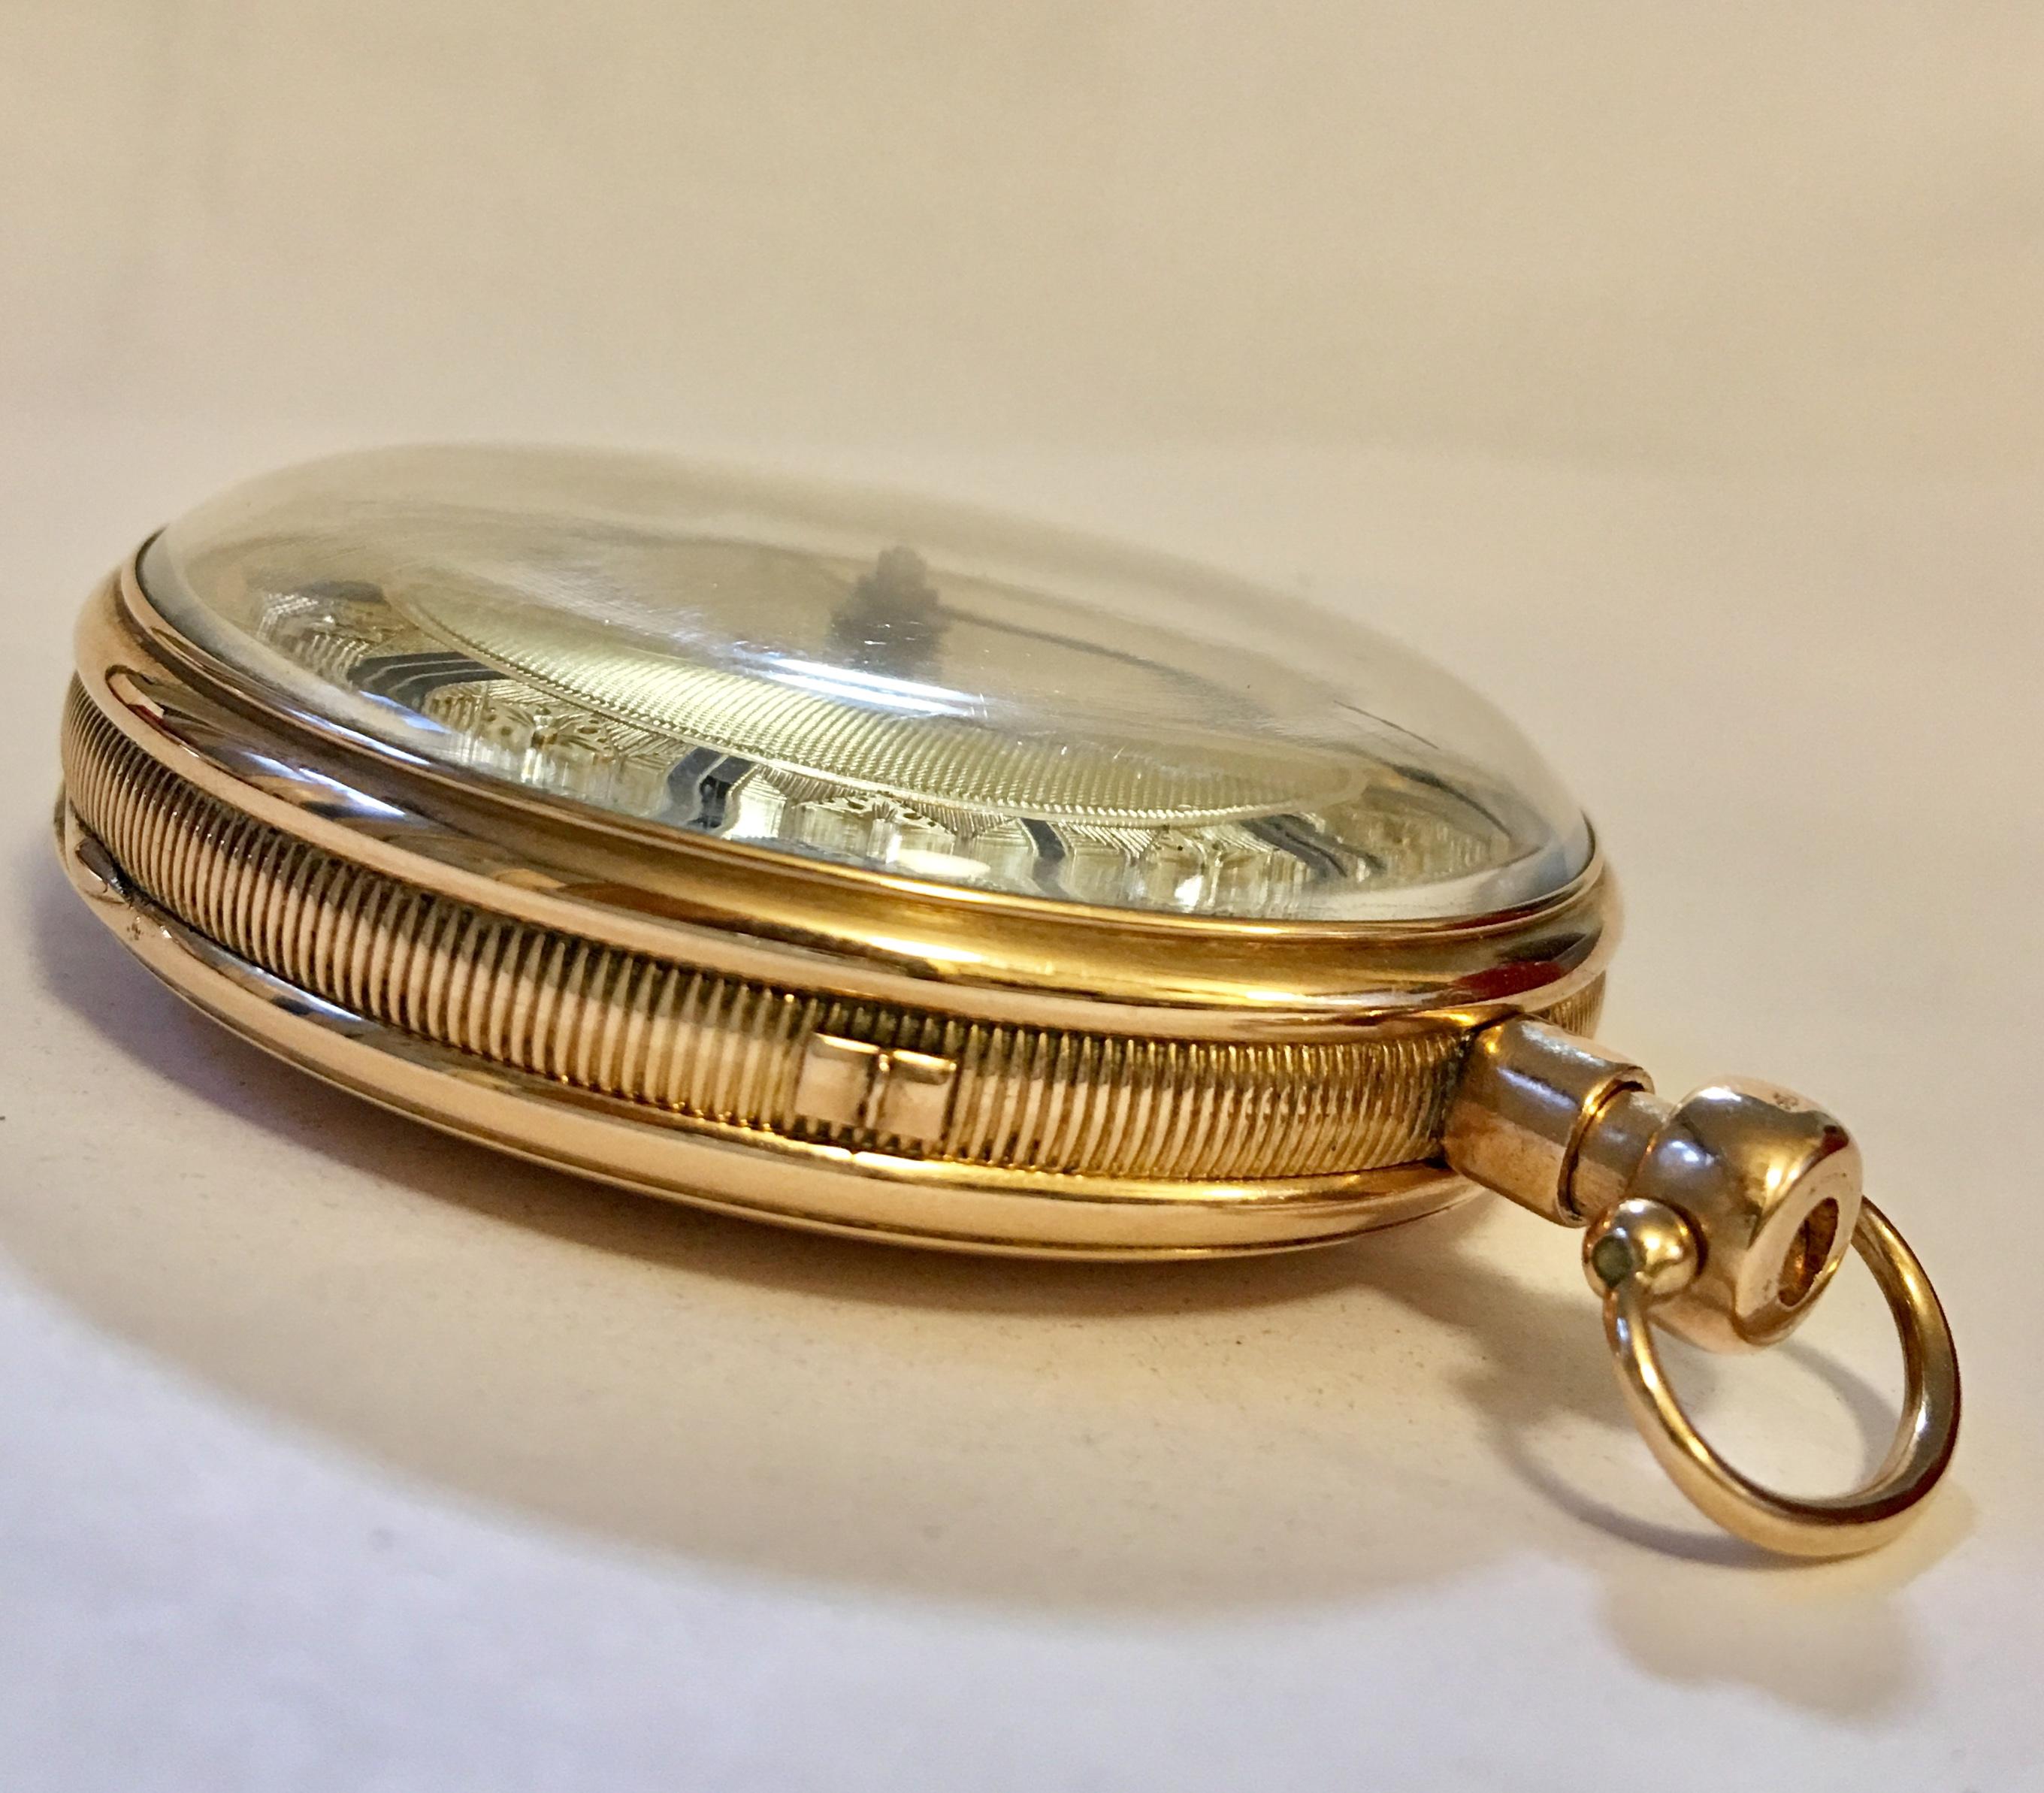 swiss repeater pocket watch